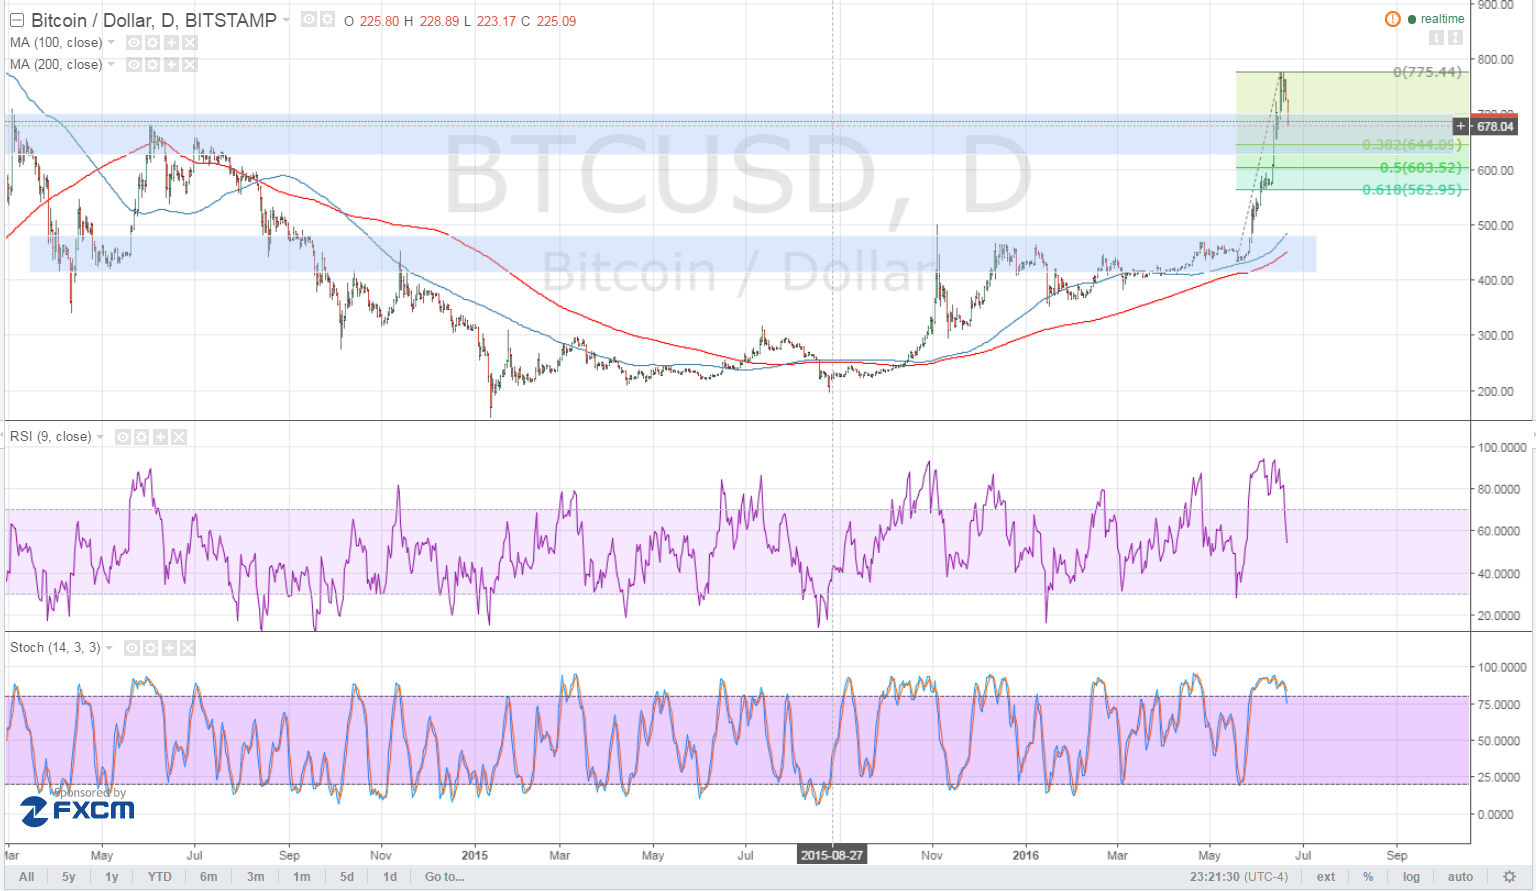 Bitcoin Price Technical Analysis for 06/21/2016 - Watch These Correction Levels